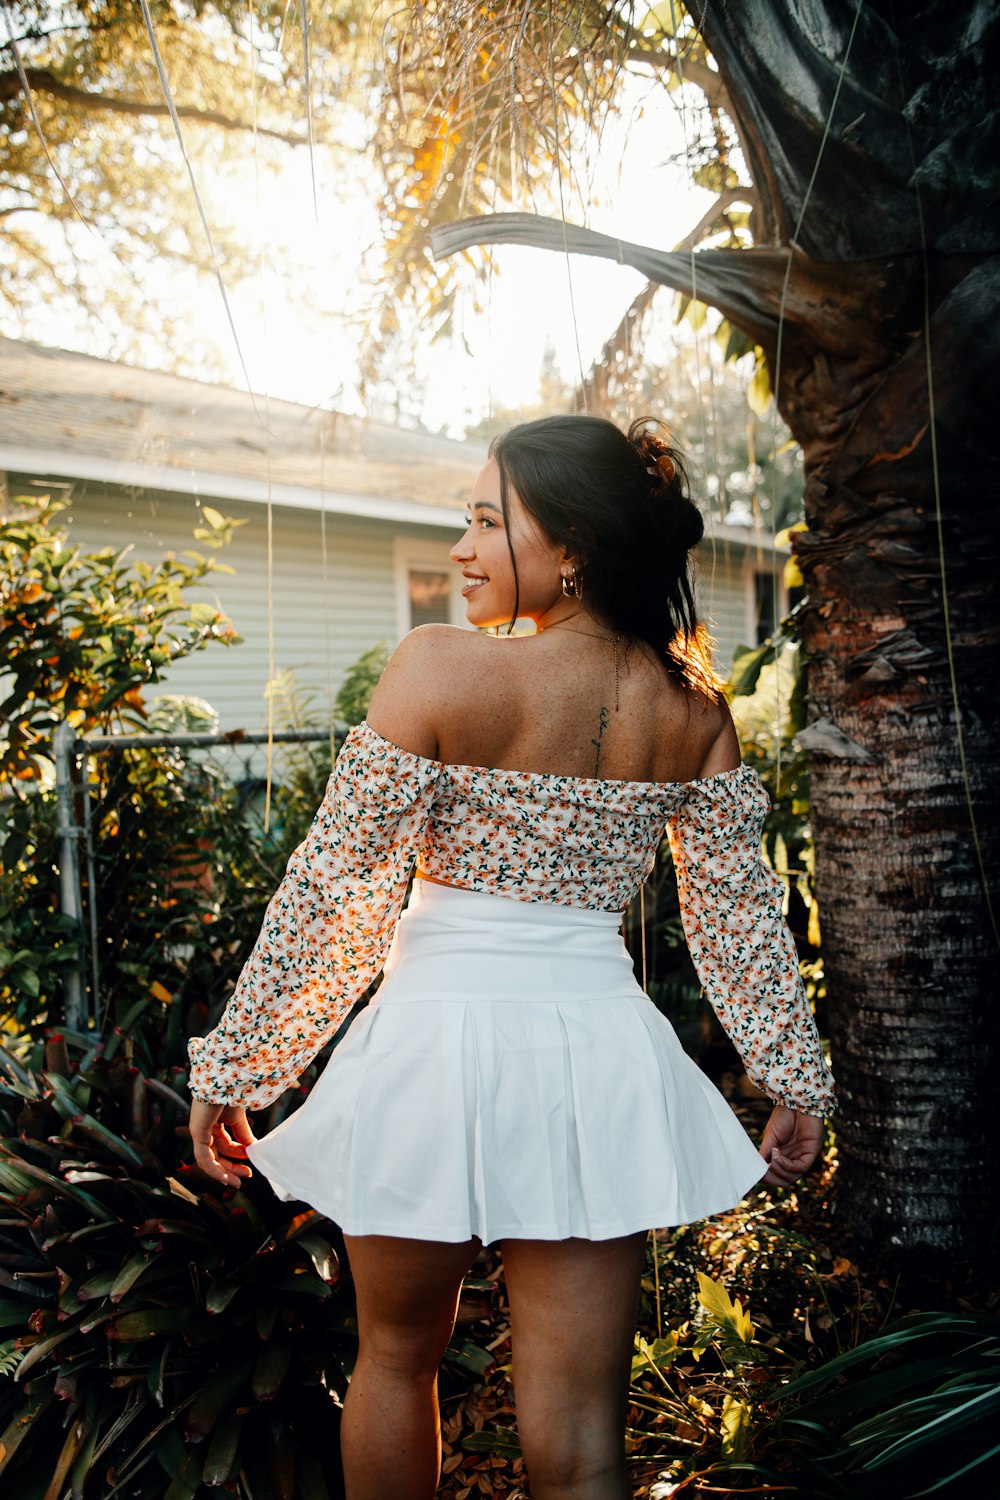 a woman wearing a white skirt and off the shoulder top